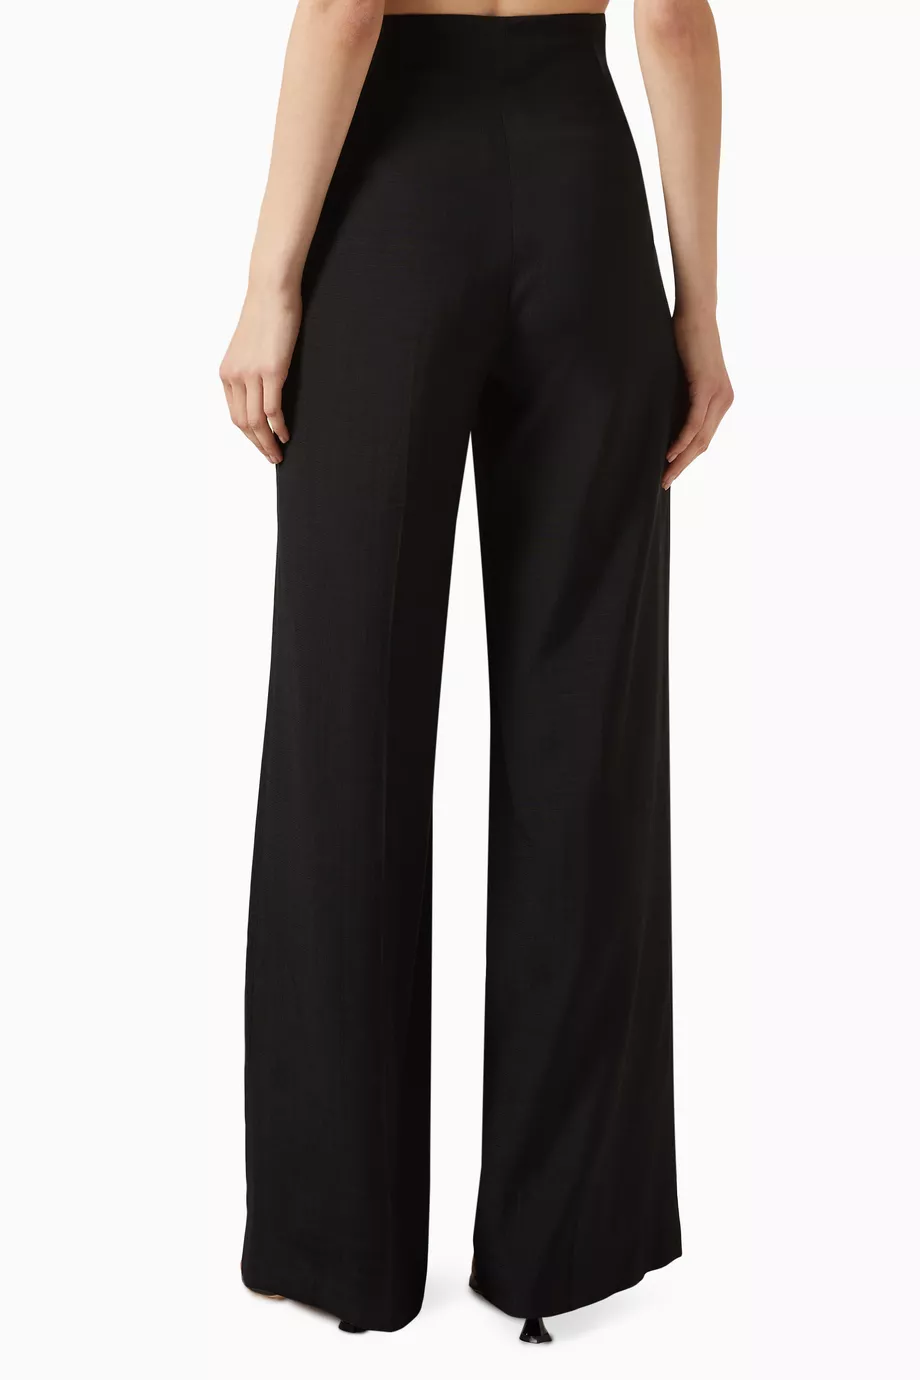 pants for women High Waist Wide Leg Pants (Color : Black, Size : S) : Buy  Online at Best Price in KSA - Souq is now : Fashion